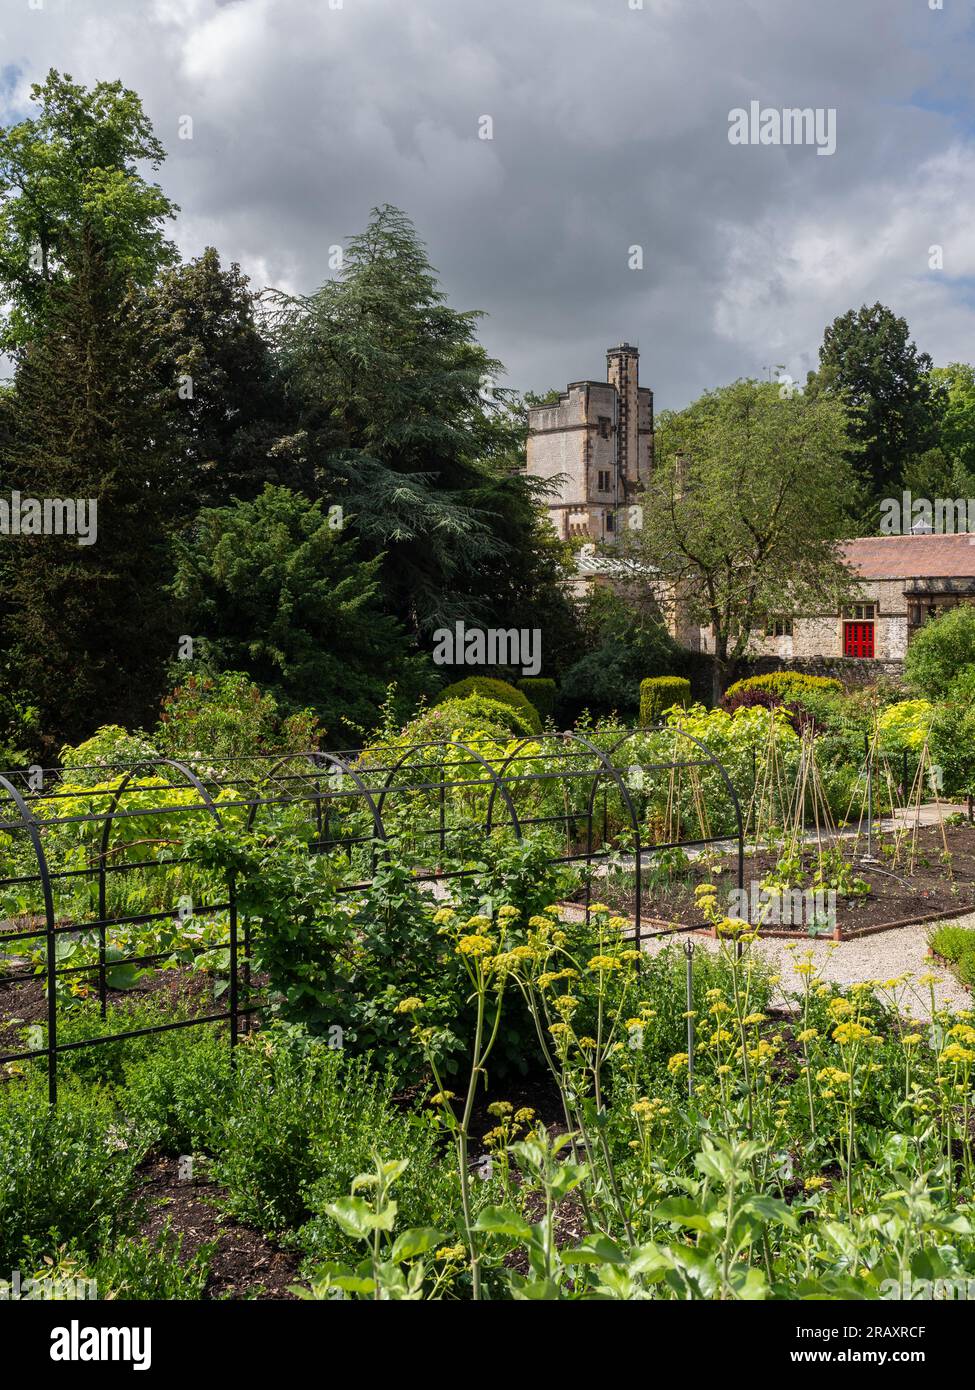 A view across the plant nursery at Thornbridge Hall, an English country house, Derbyshire, UK Stock Photo